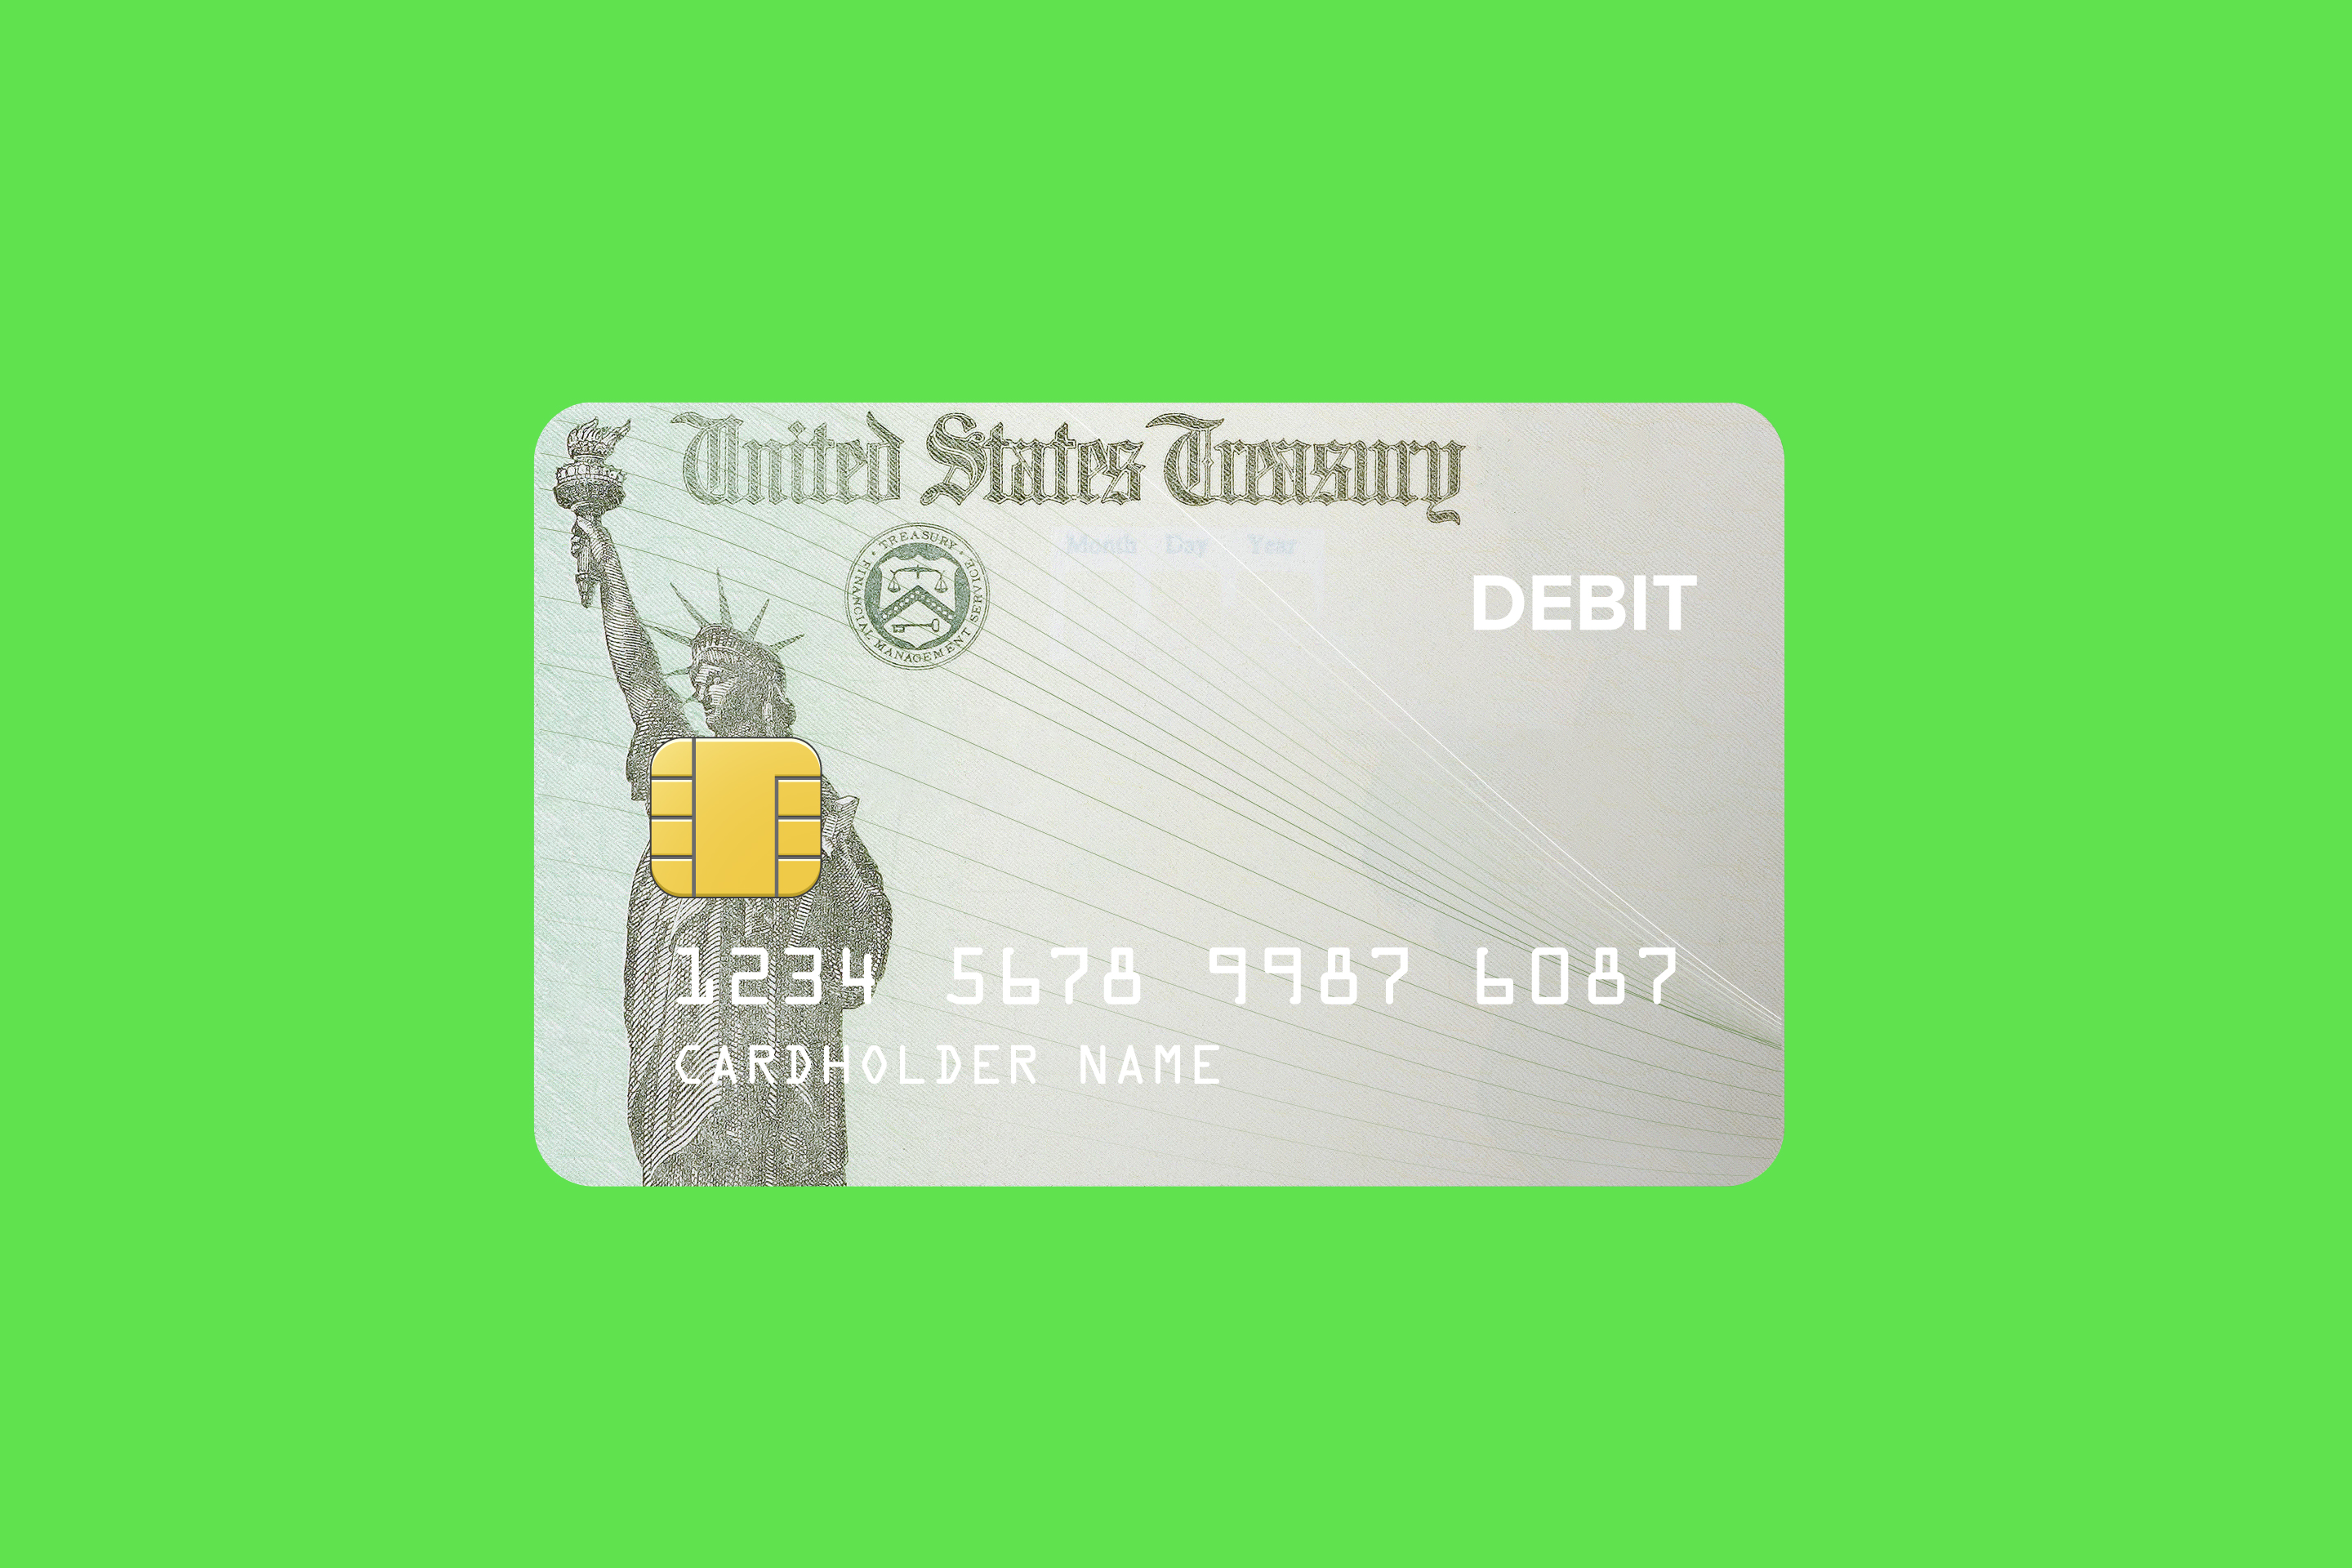 Stimulus Check Debit Card From IRS: Economic Impact Payments | Money